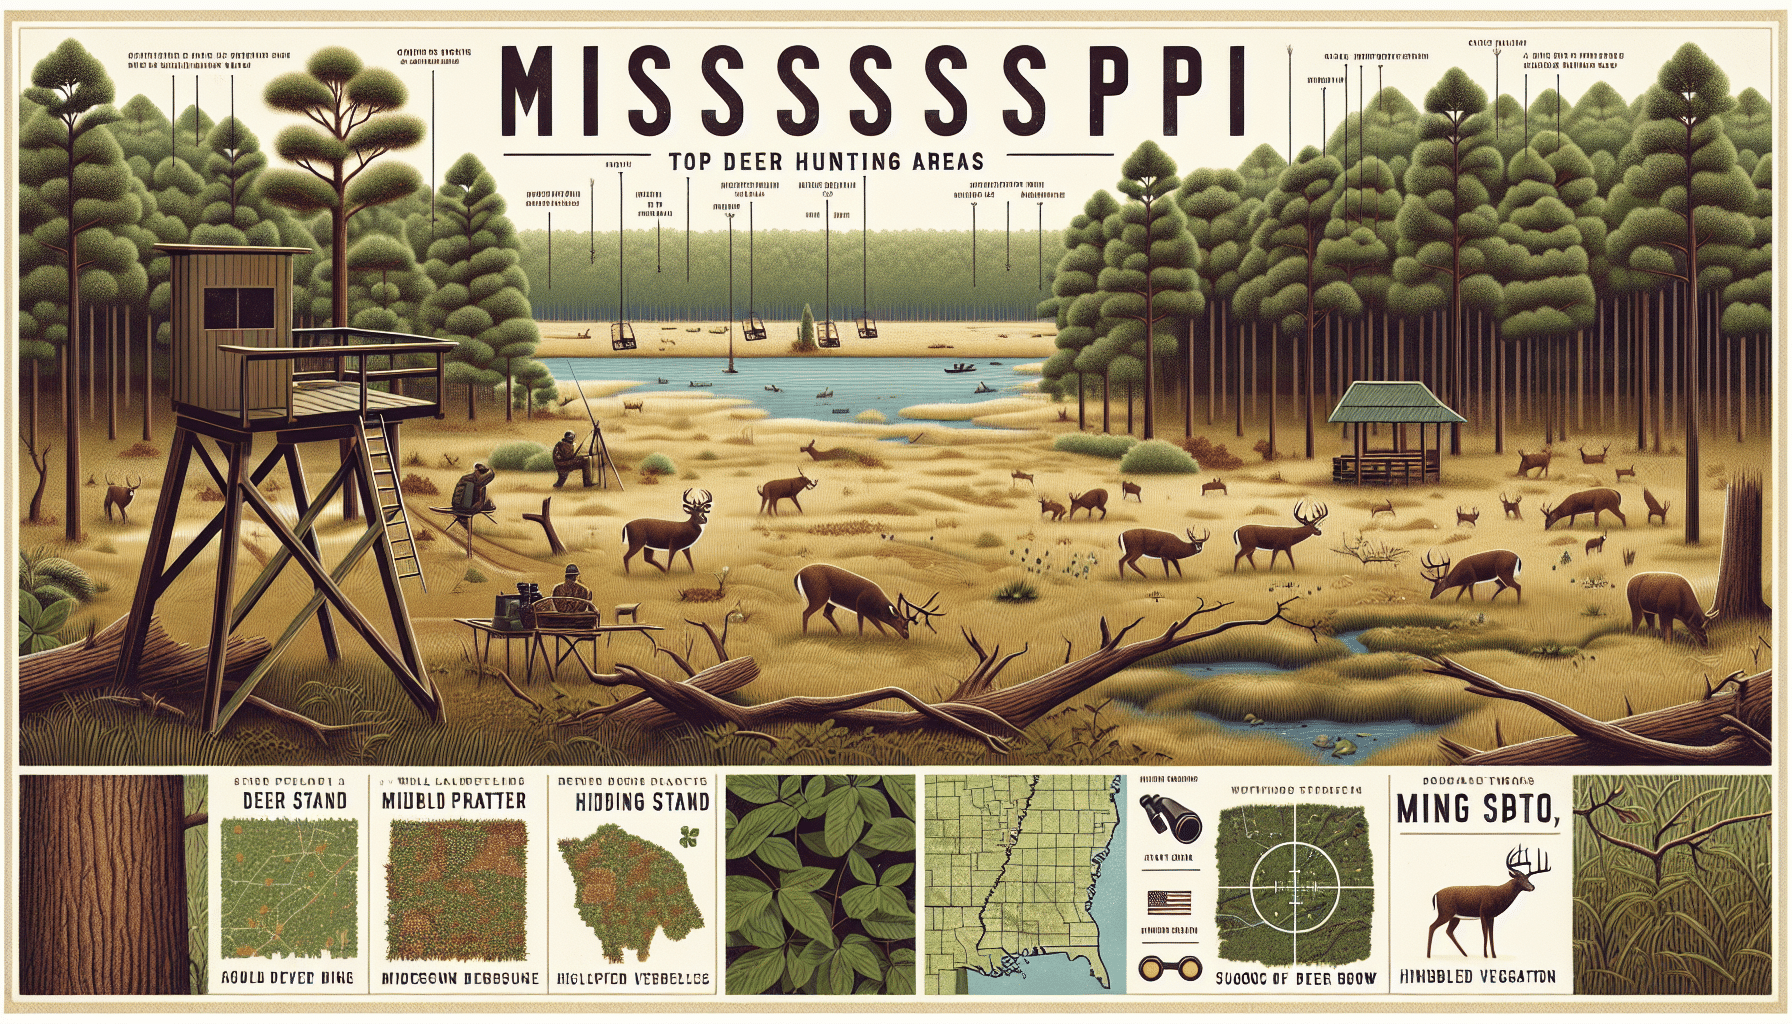 A detailed visual representation of Mississippi's top deer hunting areas, showcasing an assortment of diverse landscapes. Include a variety of features such as dense forests, open fields, and tranquil rivers. Add details that suggest these areas are good for hunting such as deer tracks, hiding spots, and signs of deer activity like nibbled vegetation. Display hunting strategies aspirationally, using symbols like camouflage patterns, a well-placed tree stand, binoculars, and a hunting bow, all devoid of people, text, and brand logos.